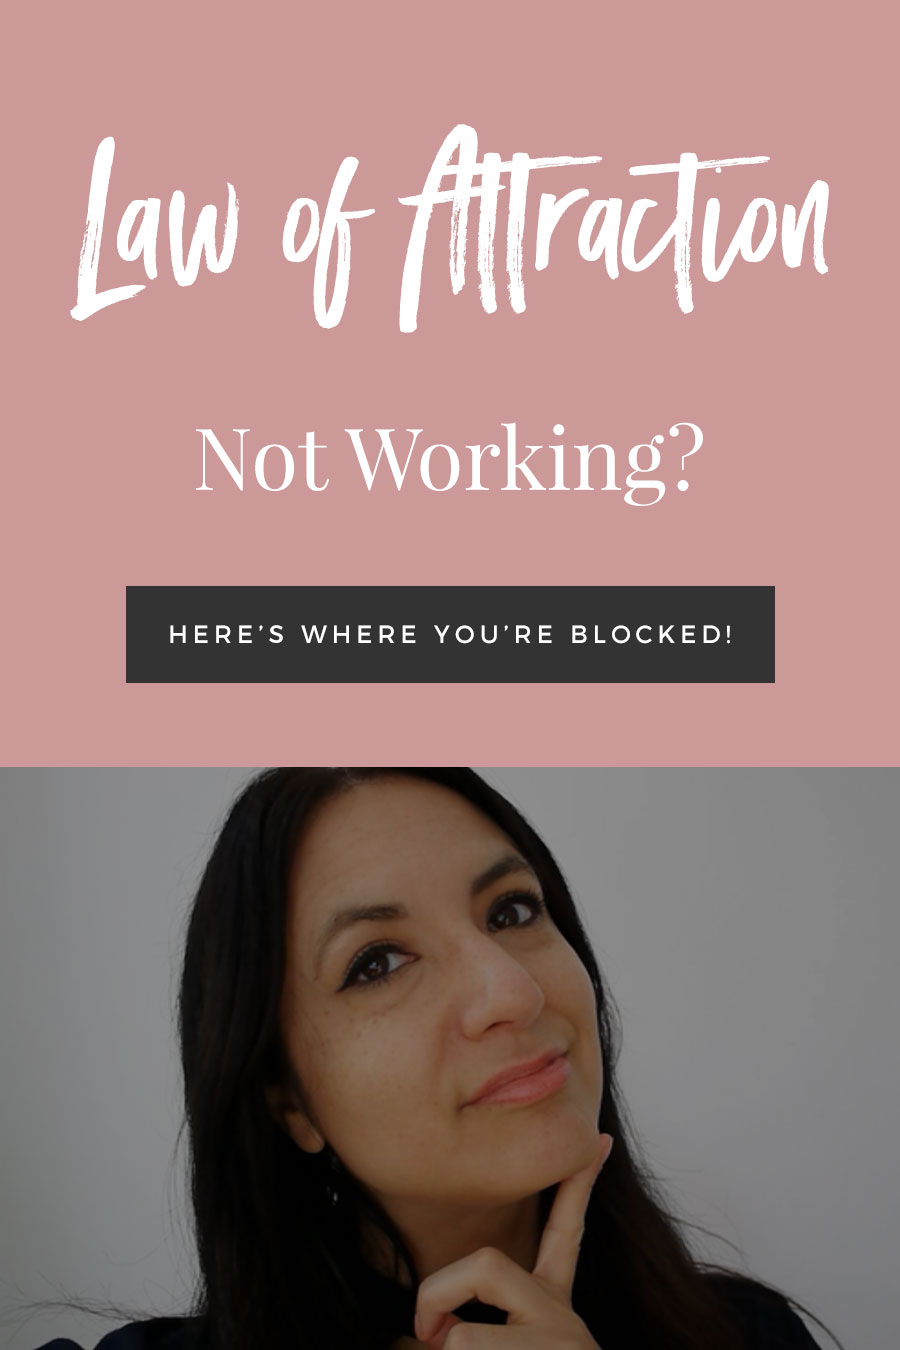 Law of Attraction Not Working? Here's Where You're Blocked